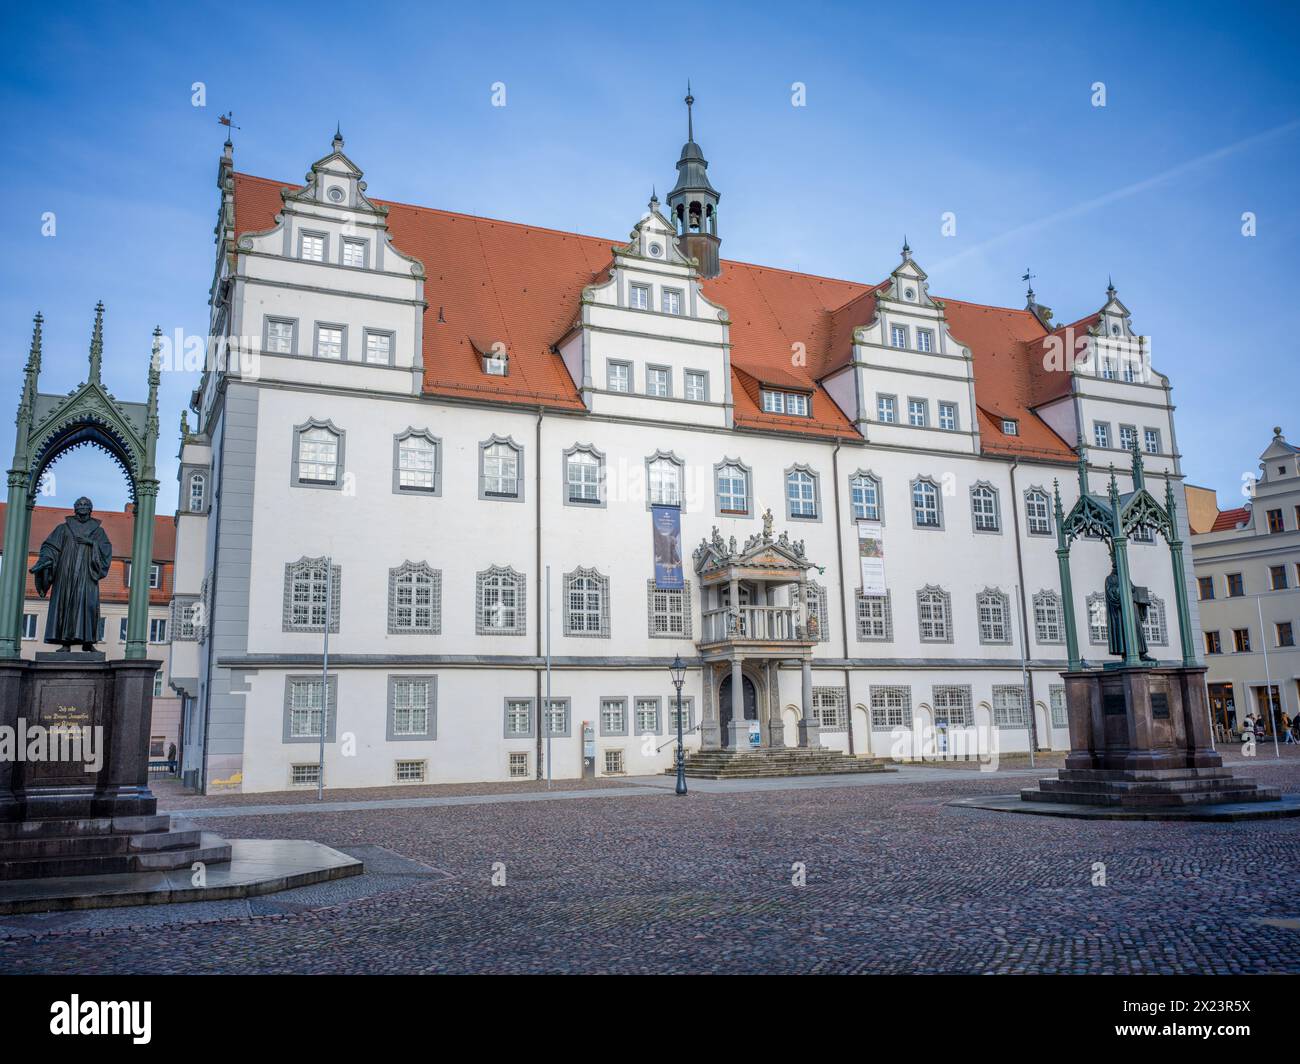 Town hall, Lutherstadt Wittenberg, Saxony-Anhalt, Germany Stock Photo